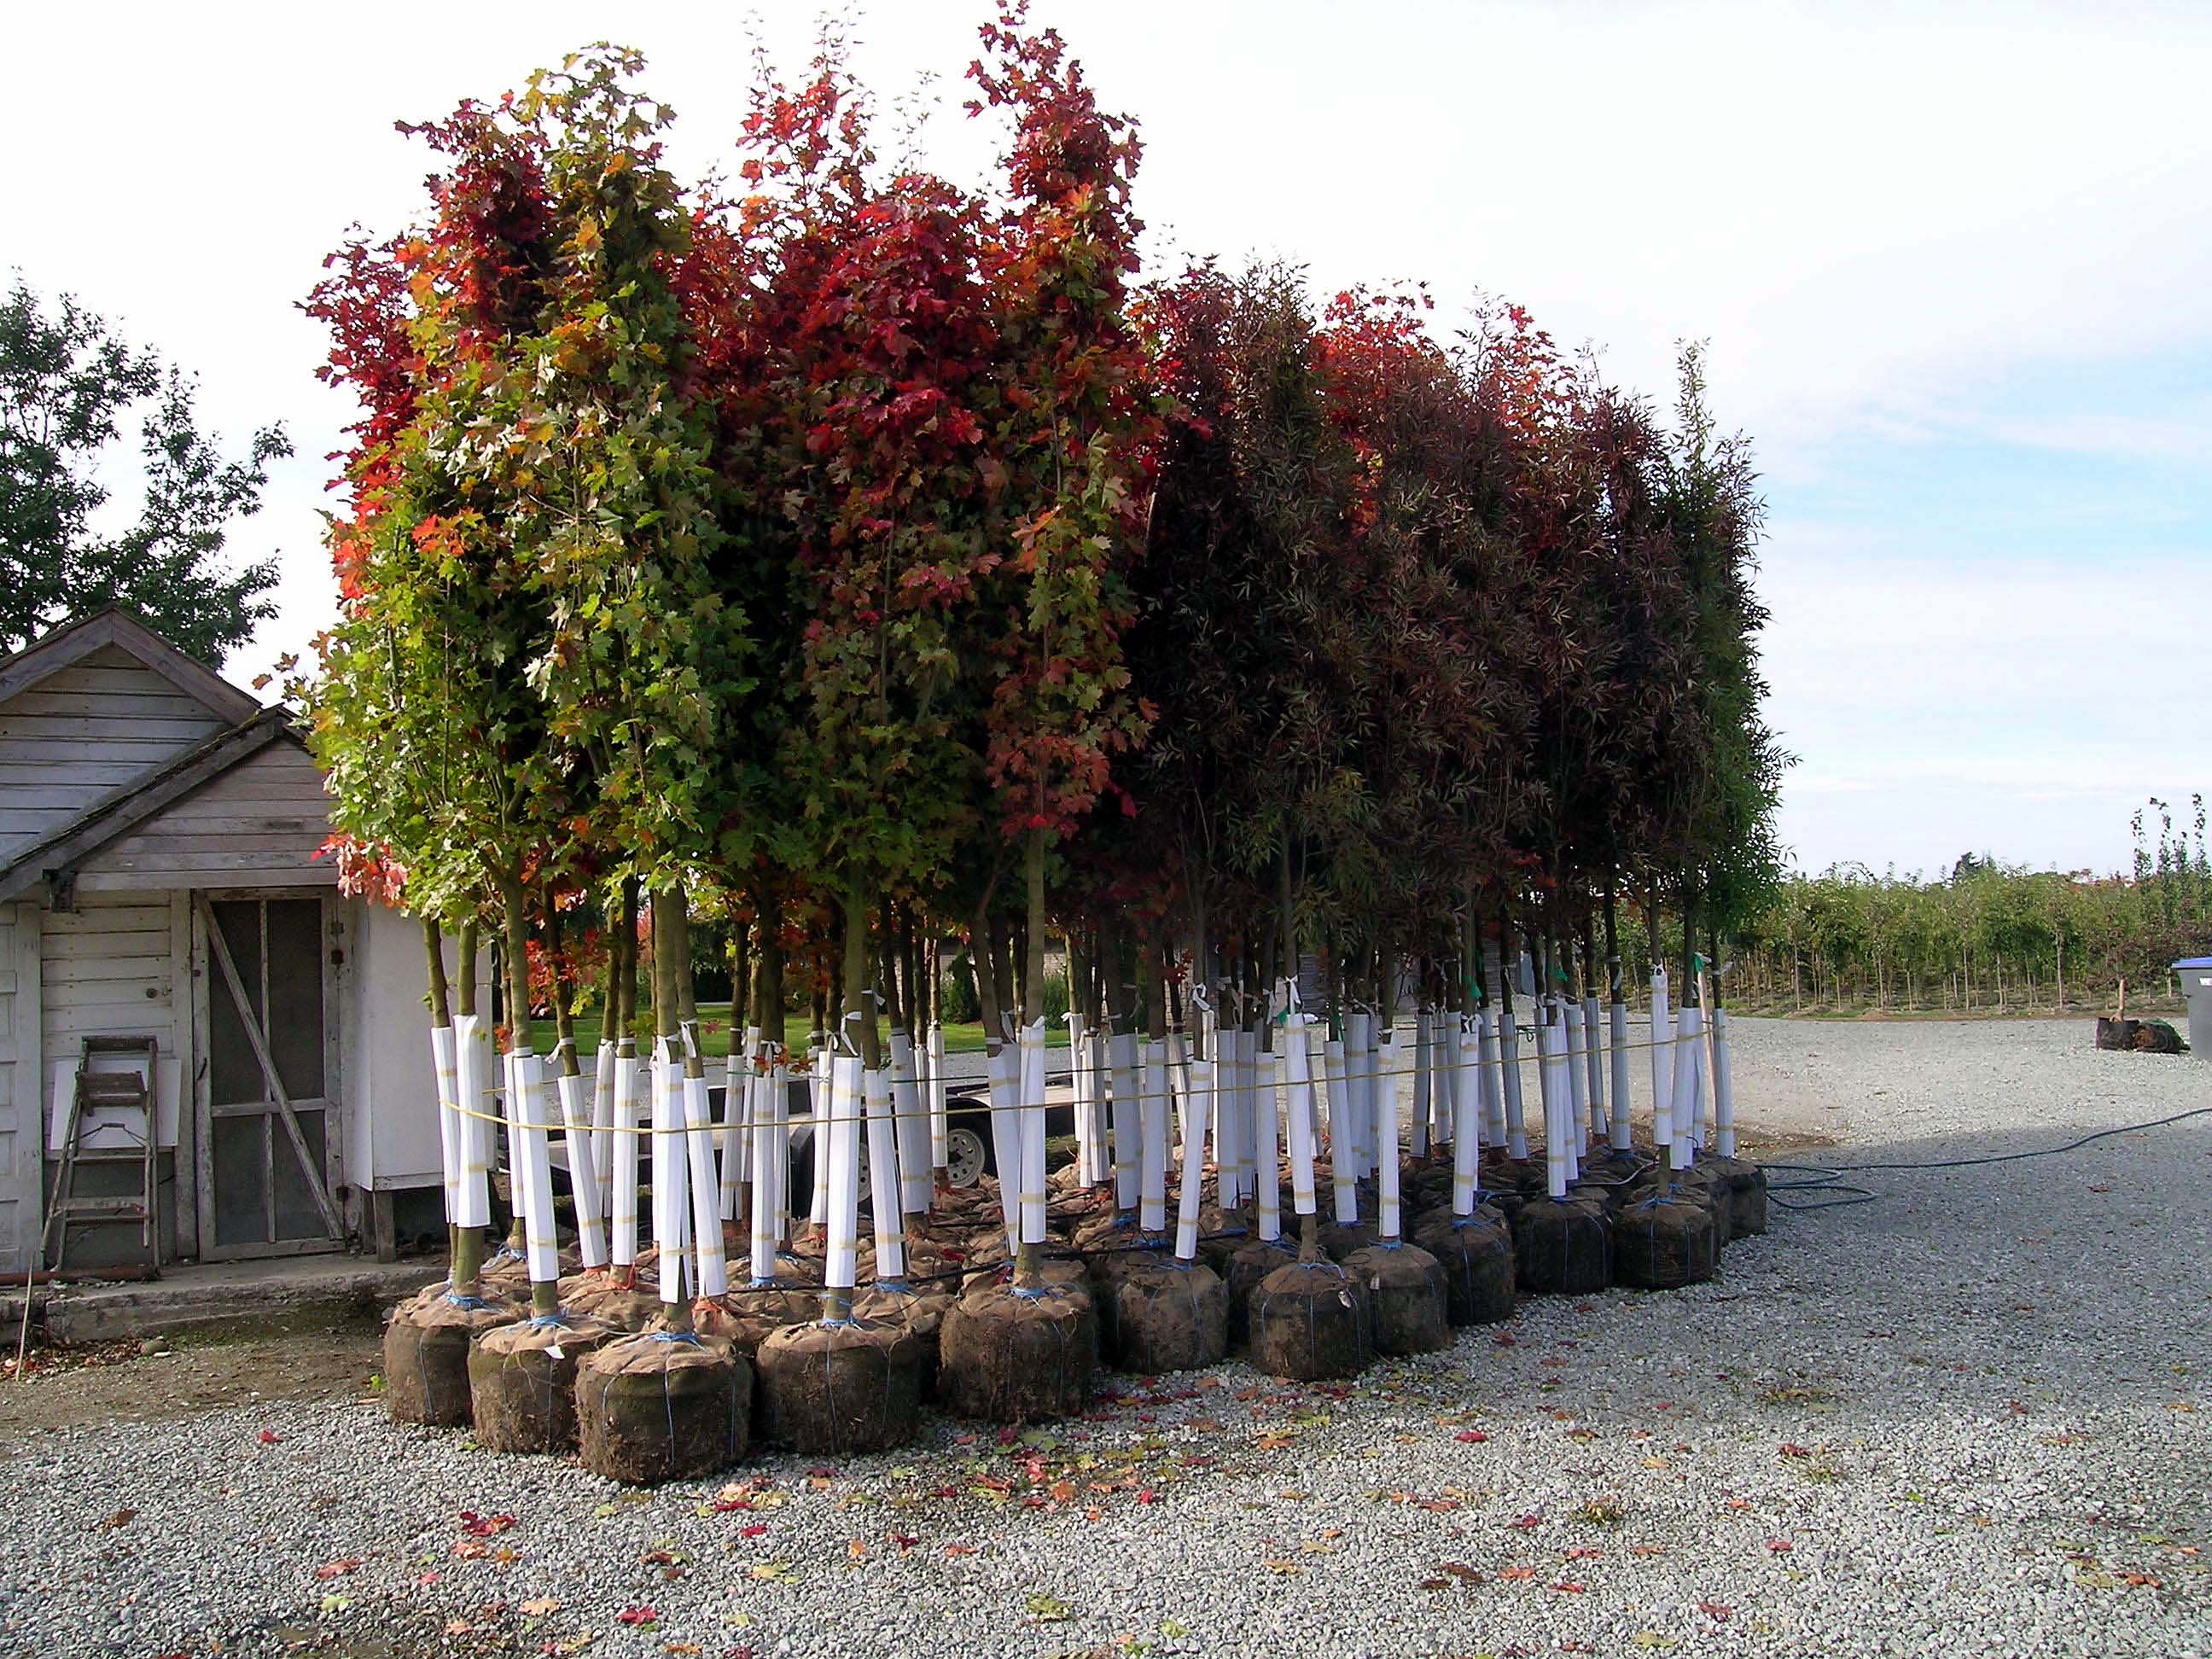 Group of Trees in Grow Bags - Urban Forest Nursery, Inc.